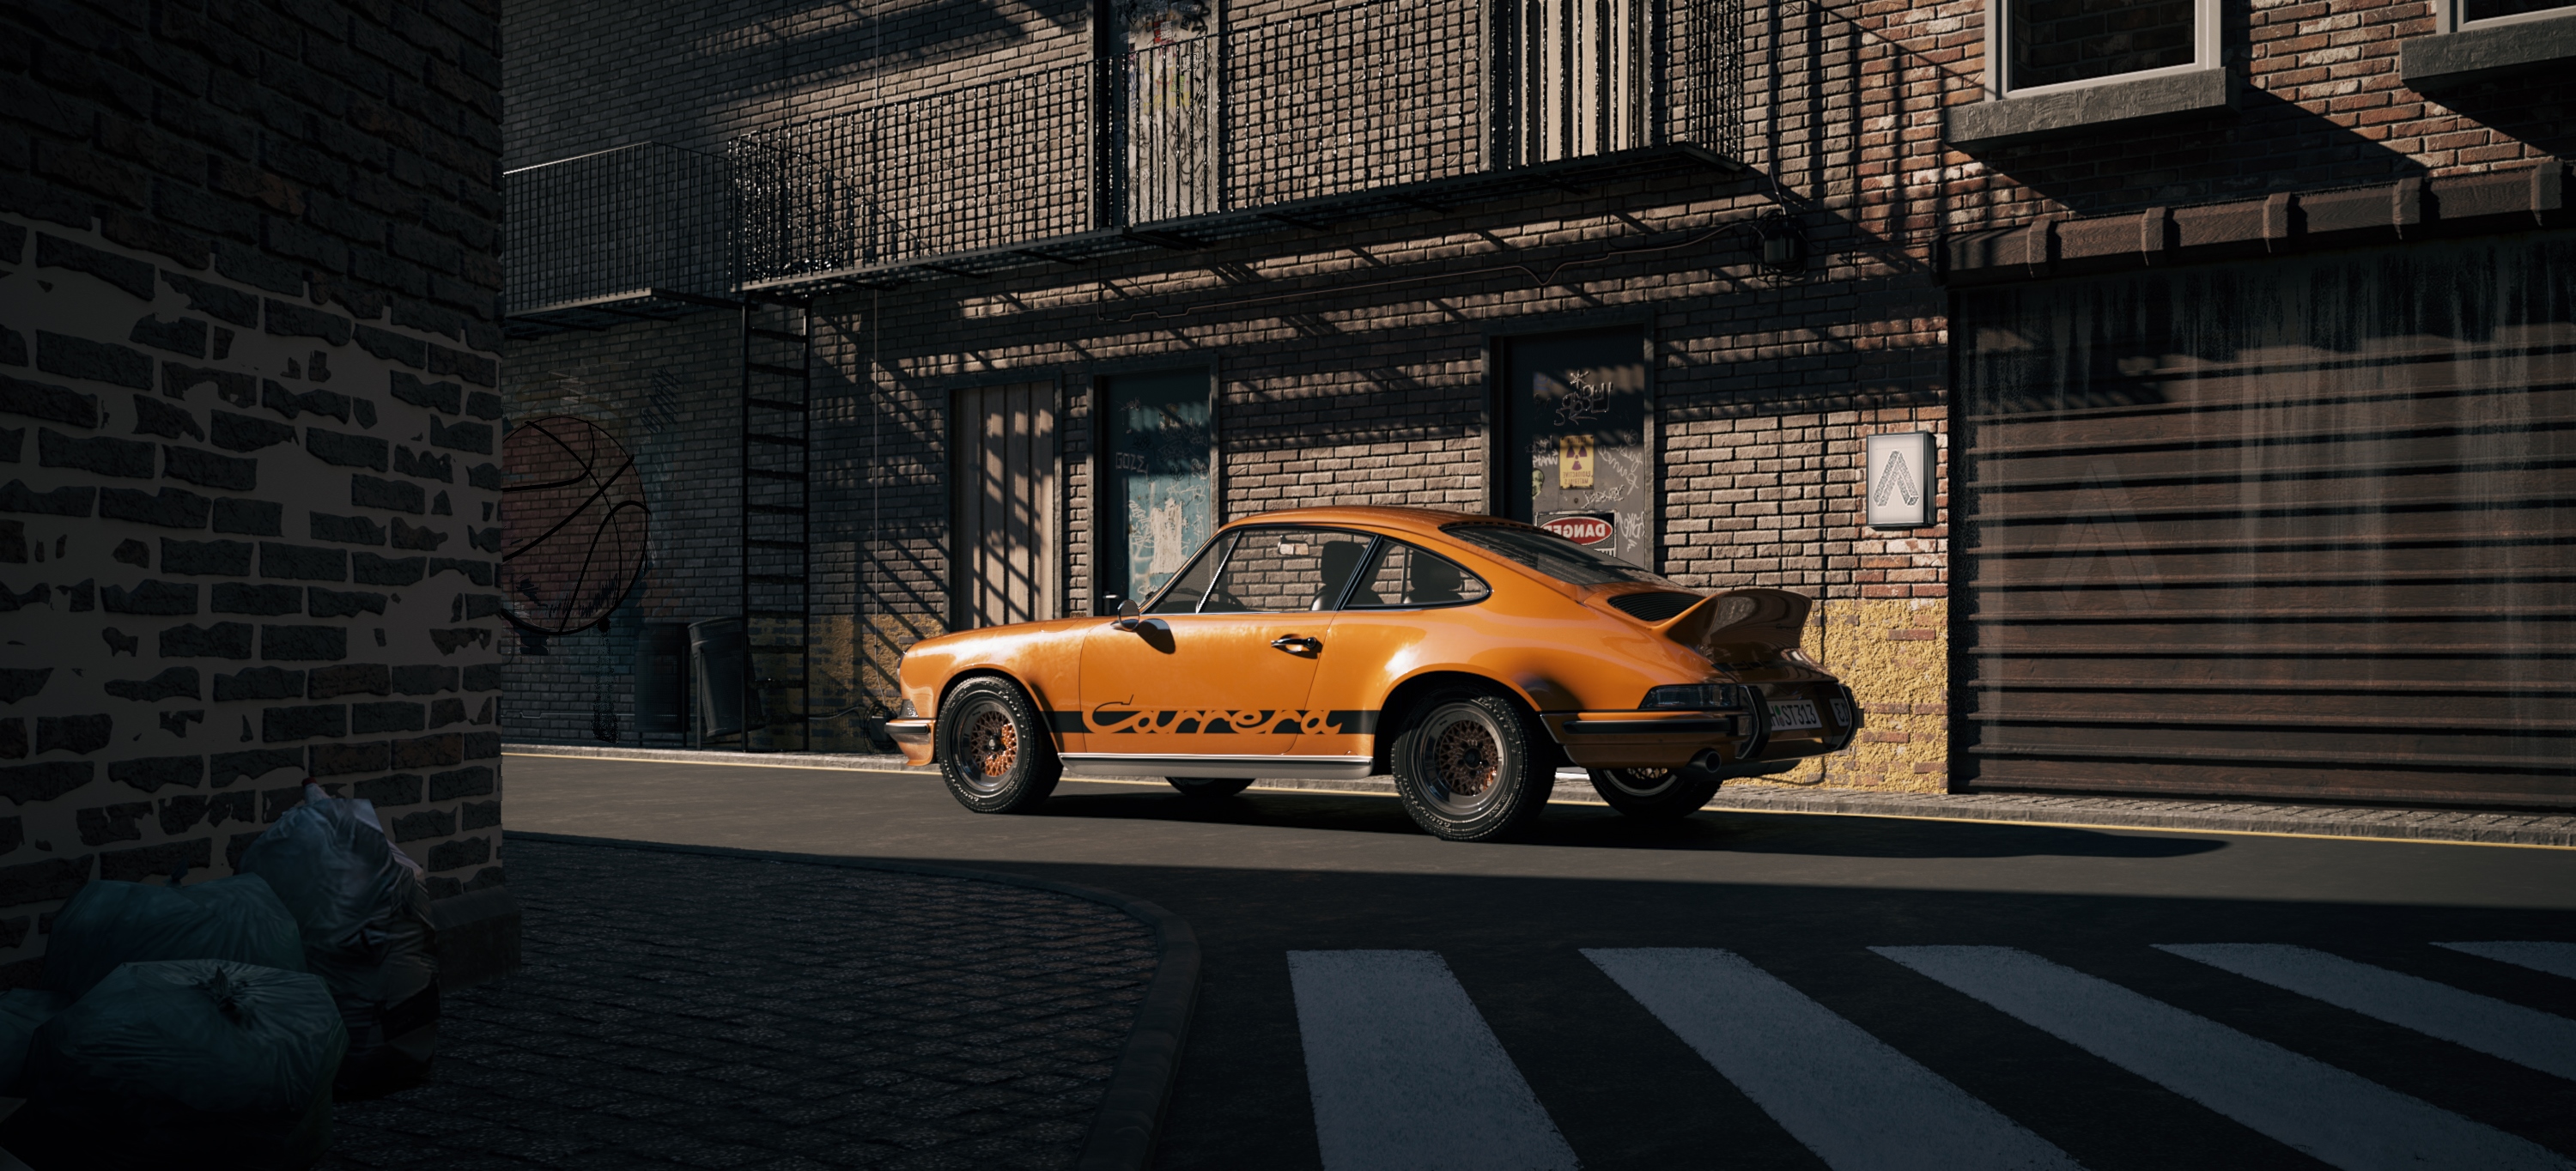 One day in suburbia - Porsche 911 RS 3d art